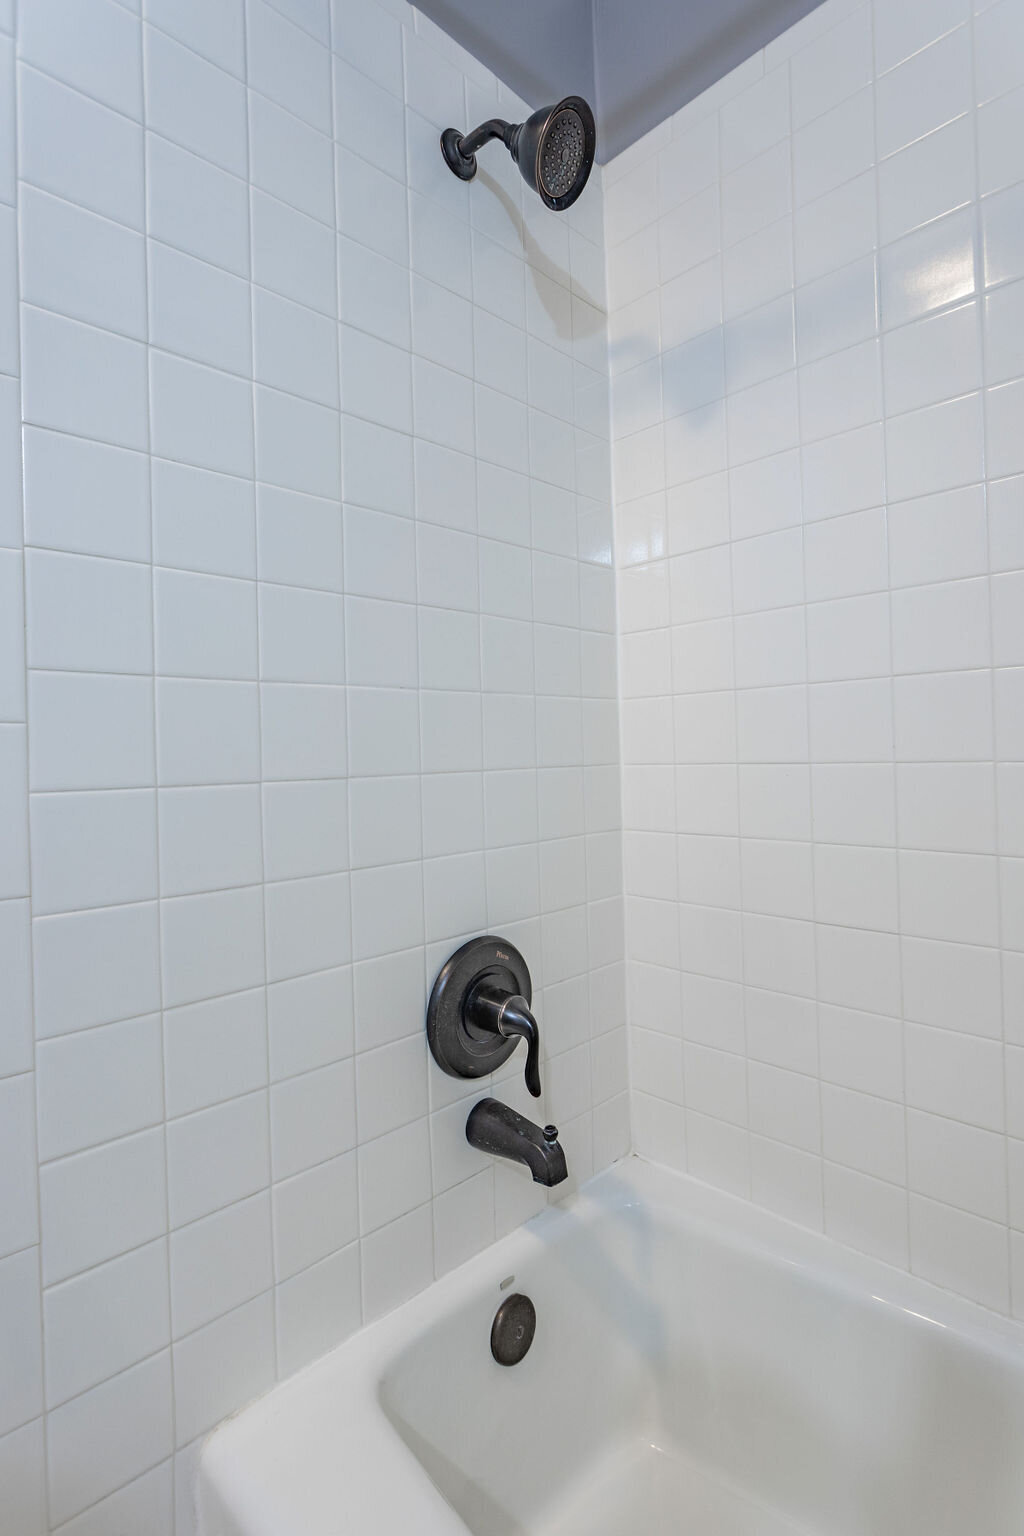 Bathtub in the spacious bathroom of this 5-bedroom, 4-bathroom vacation rental house for 16+ guests with pool, free wifi, guesthouse and game room just 20 minutes away from downtown Waco, TX.